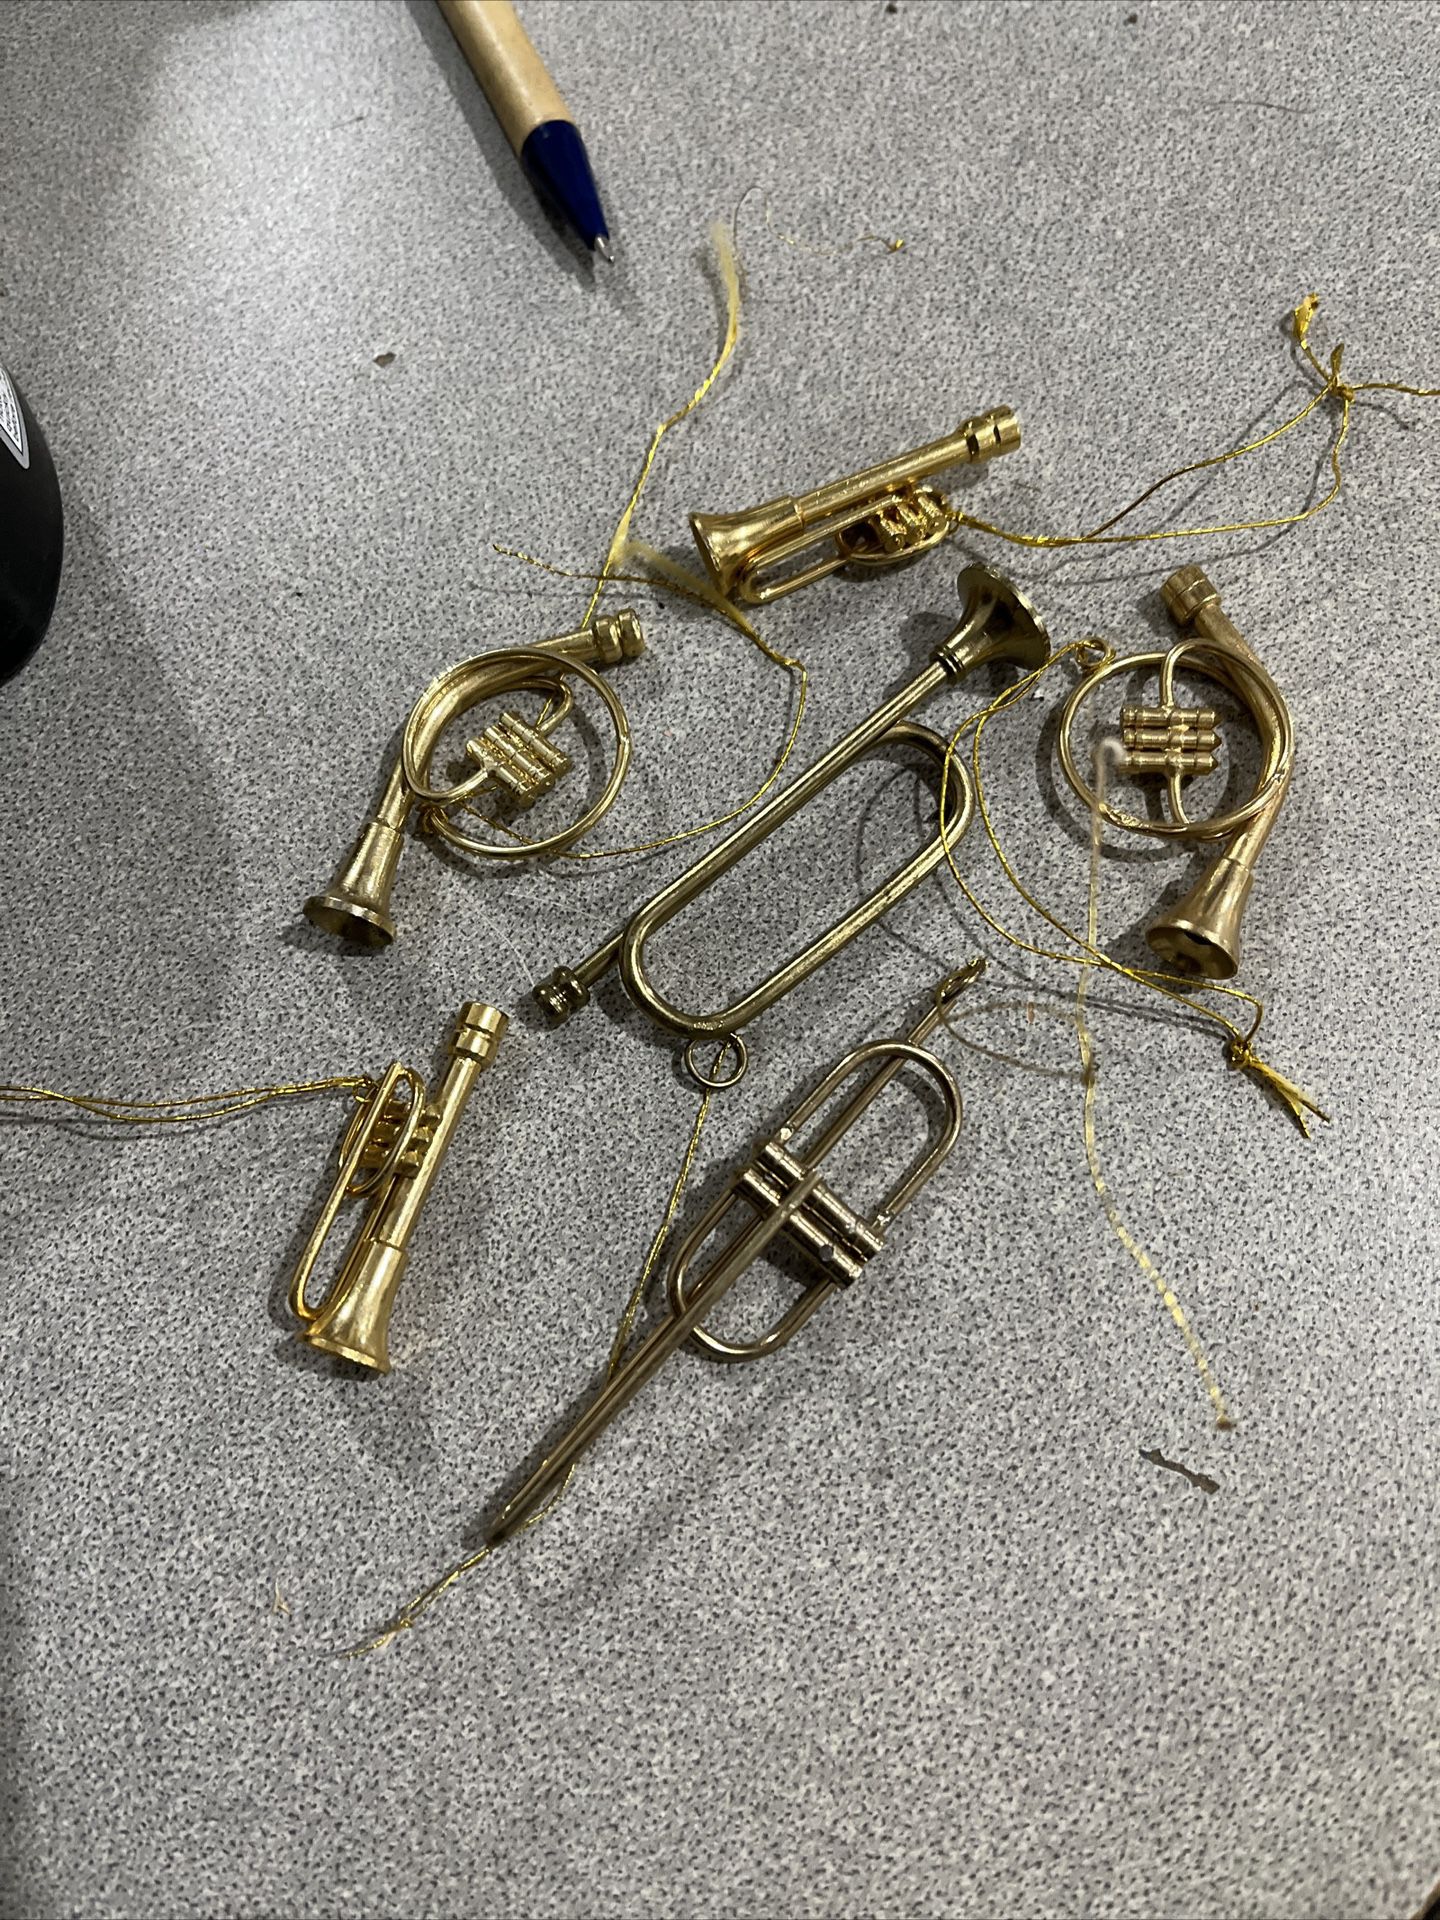 Vintage Brass Instruments For Christmas Decorations. Very Old And In New Condition. $2.00 Each